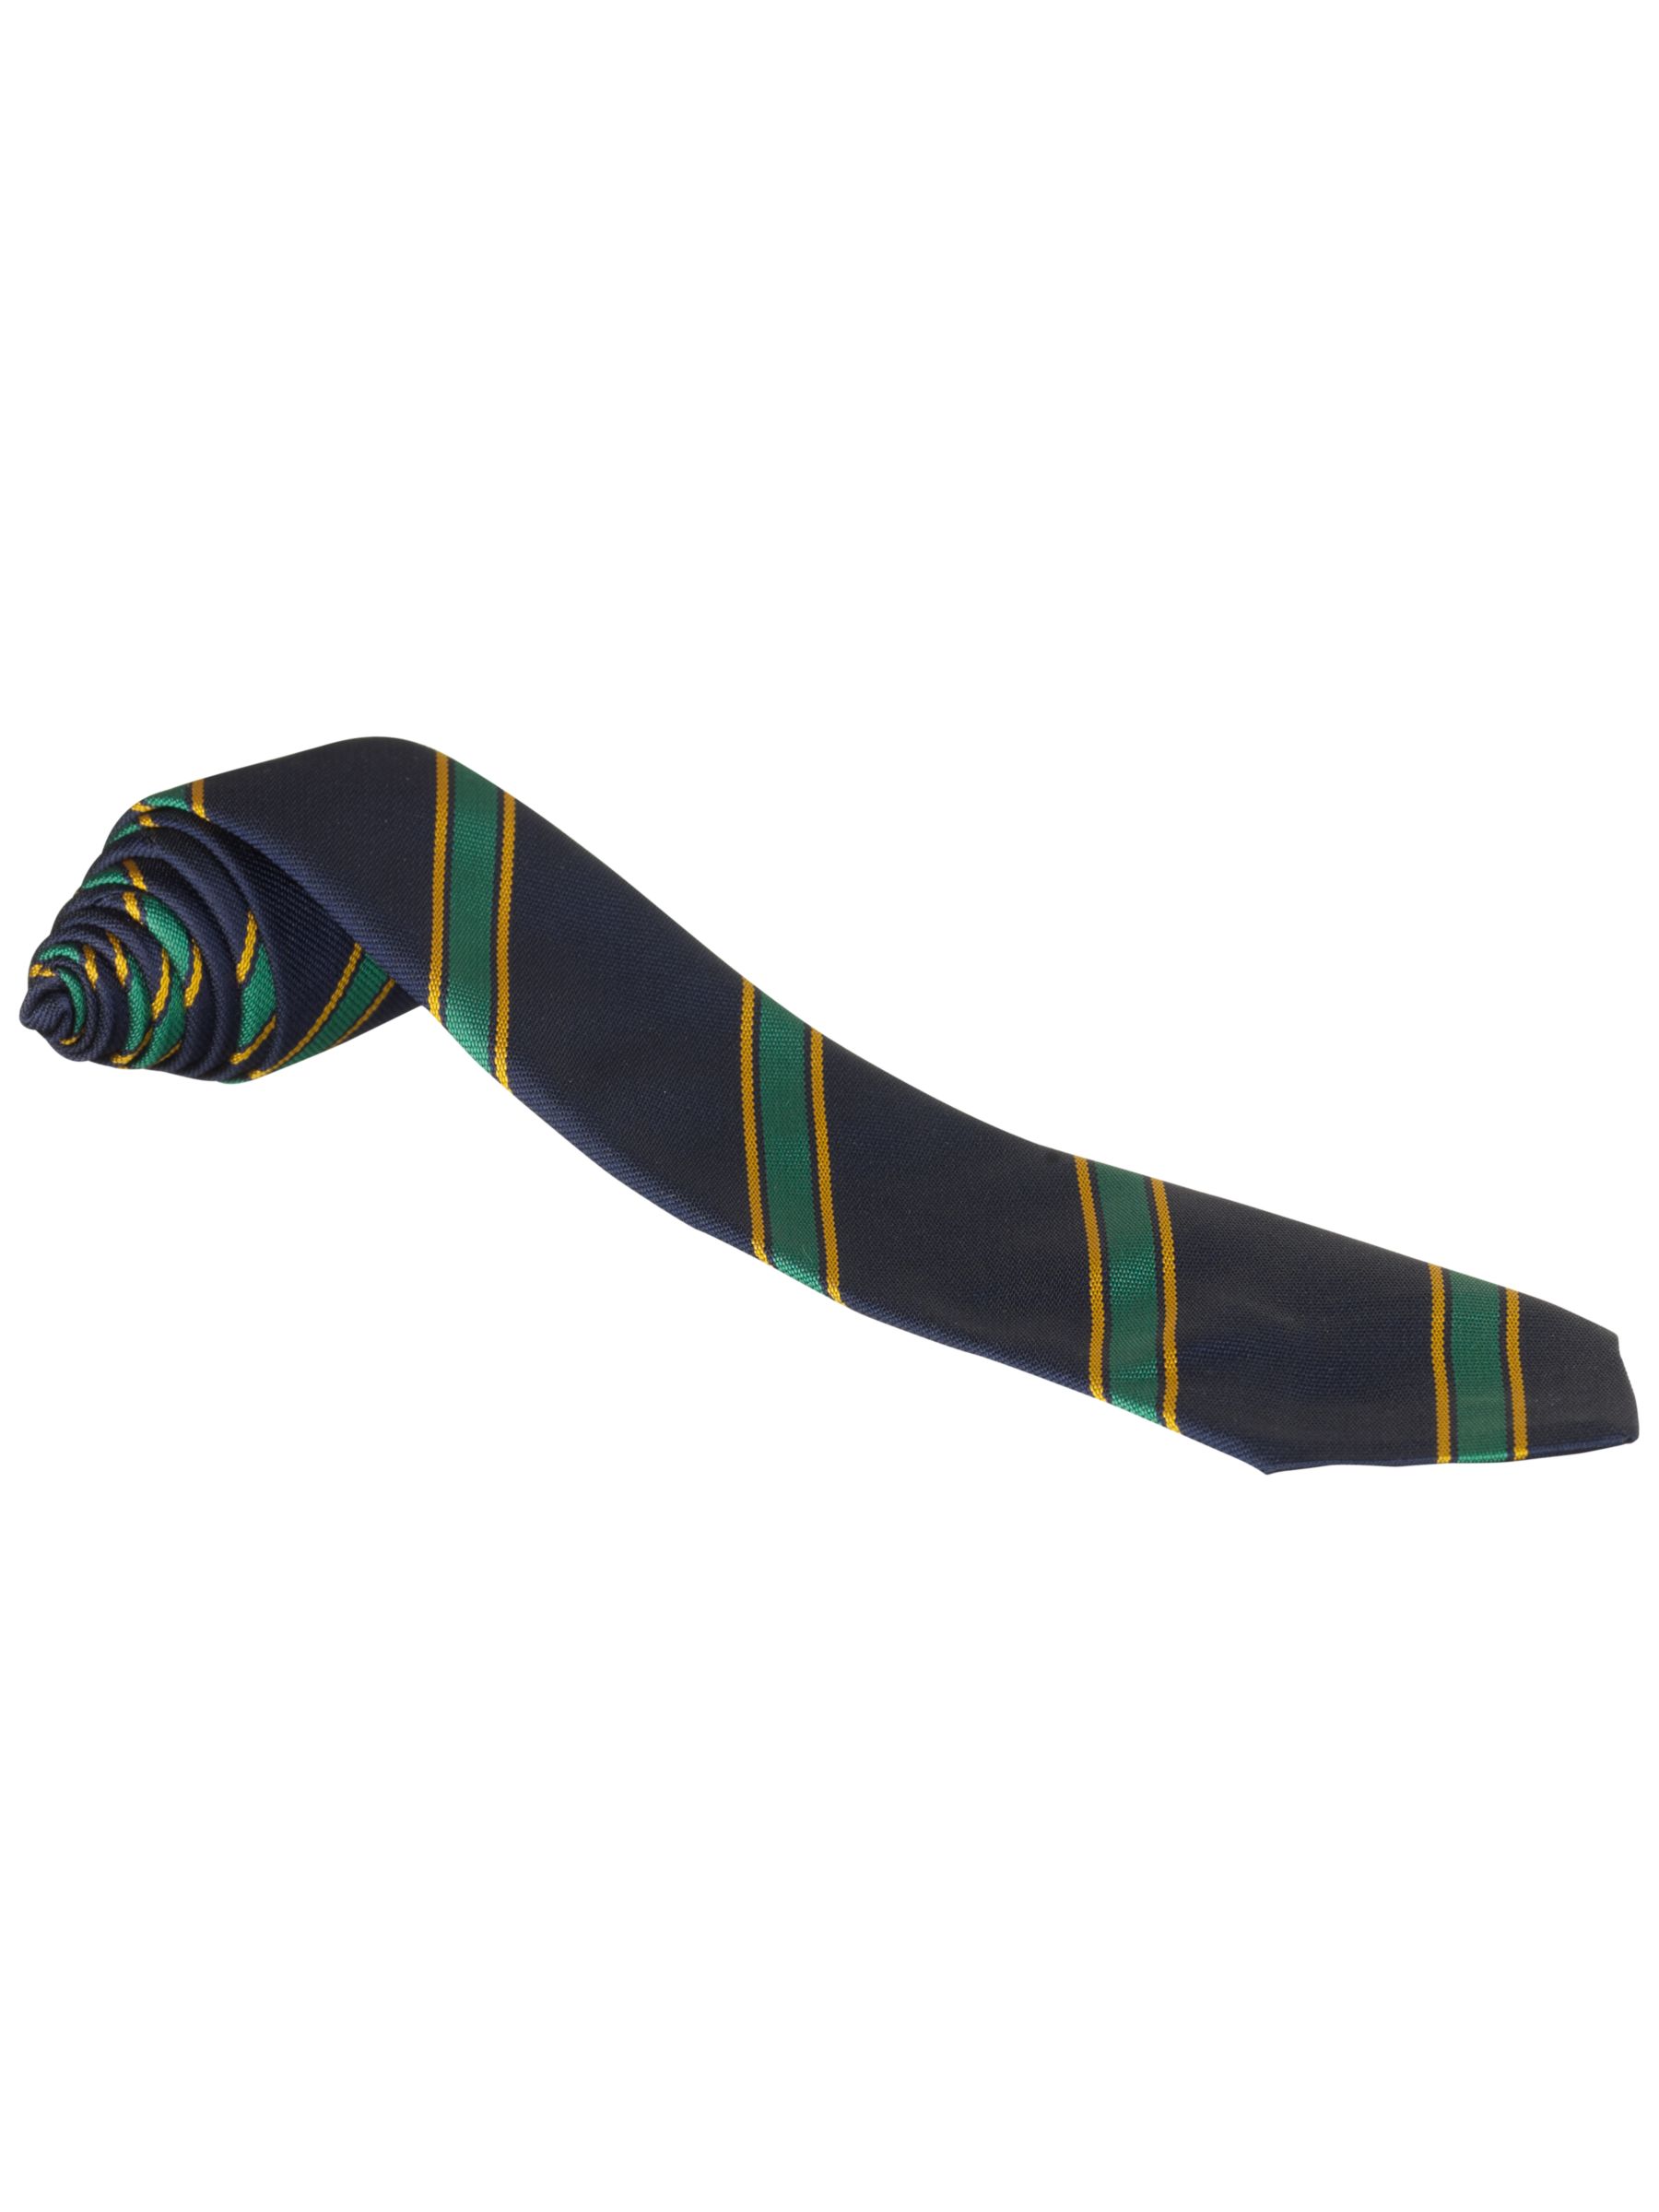 Navy And Gold Tie | John Lewis & Partners